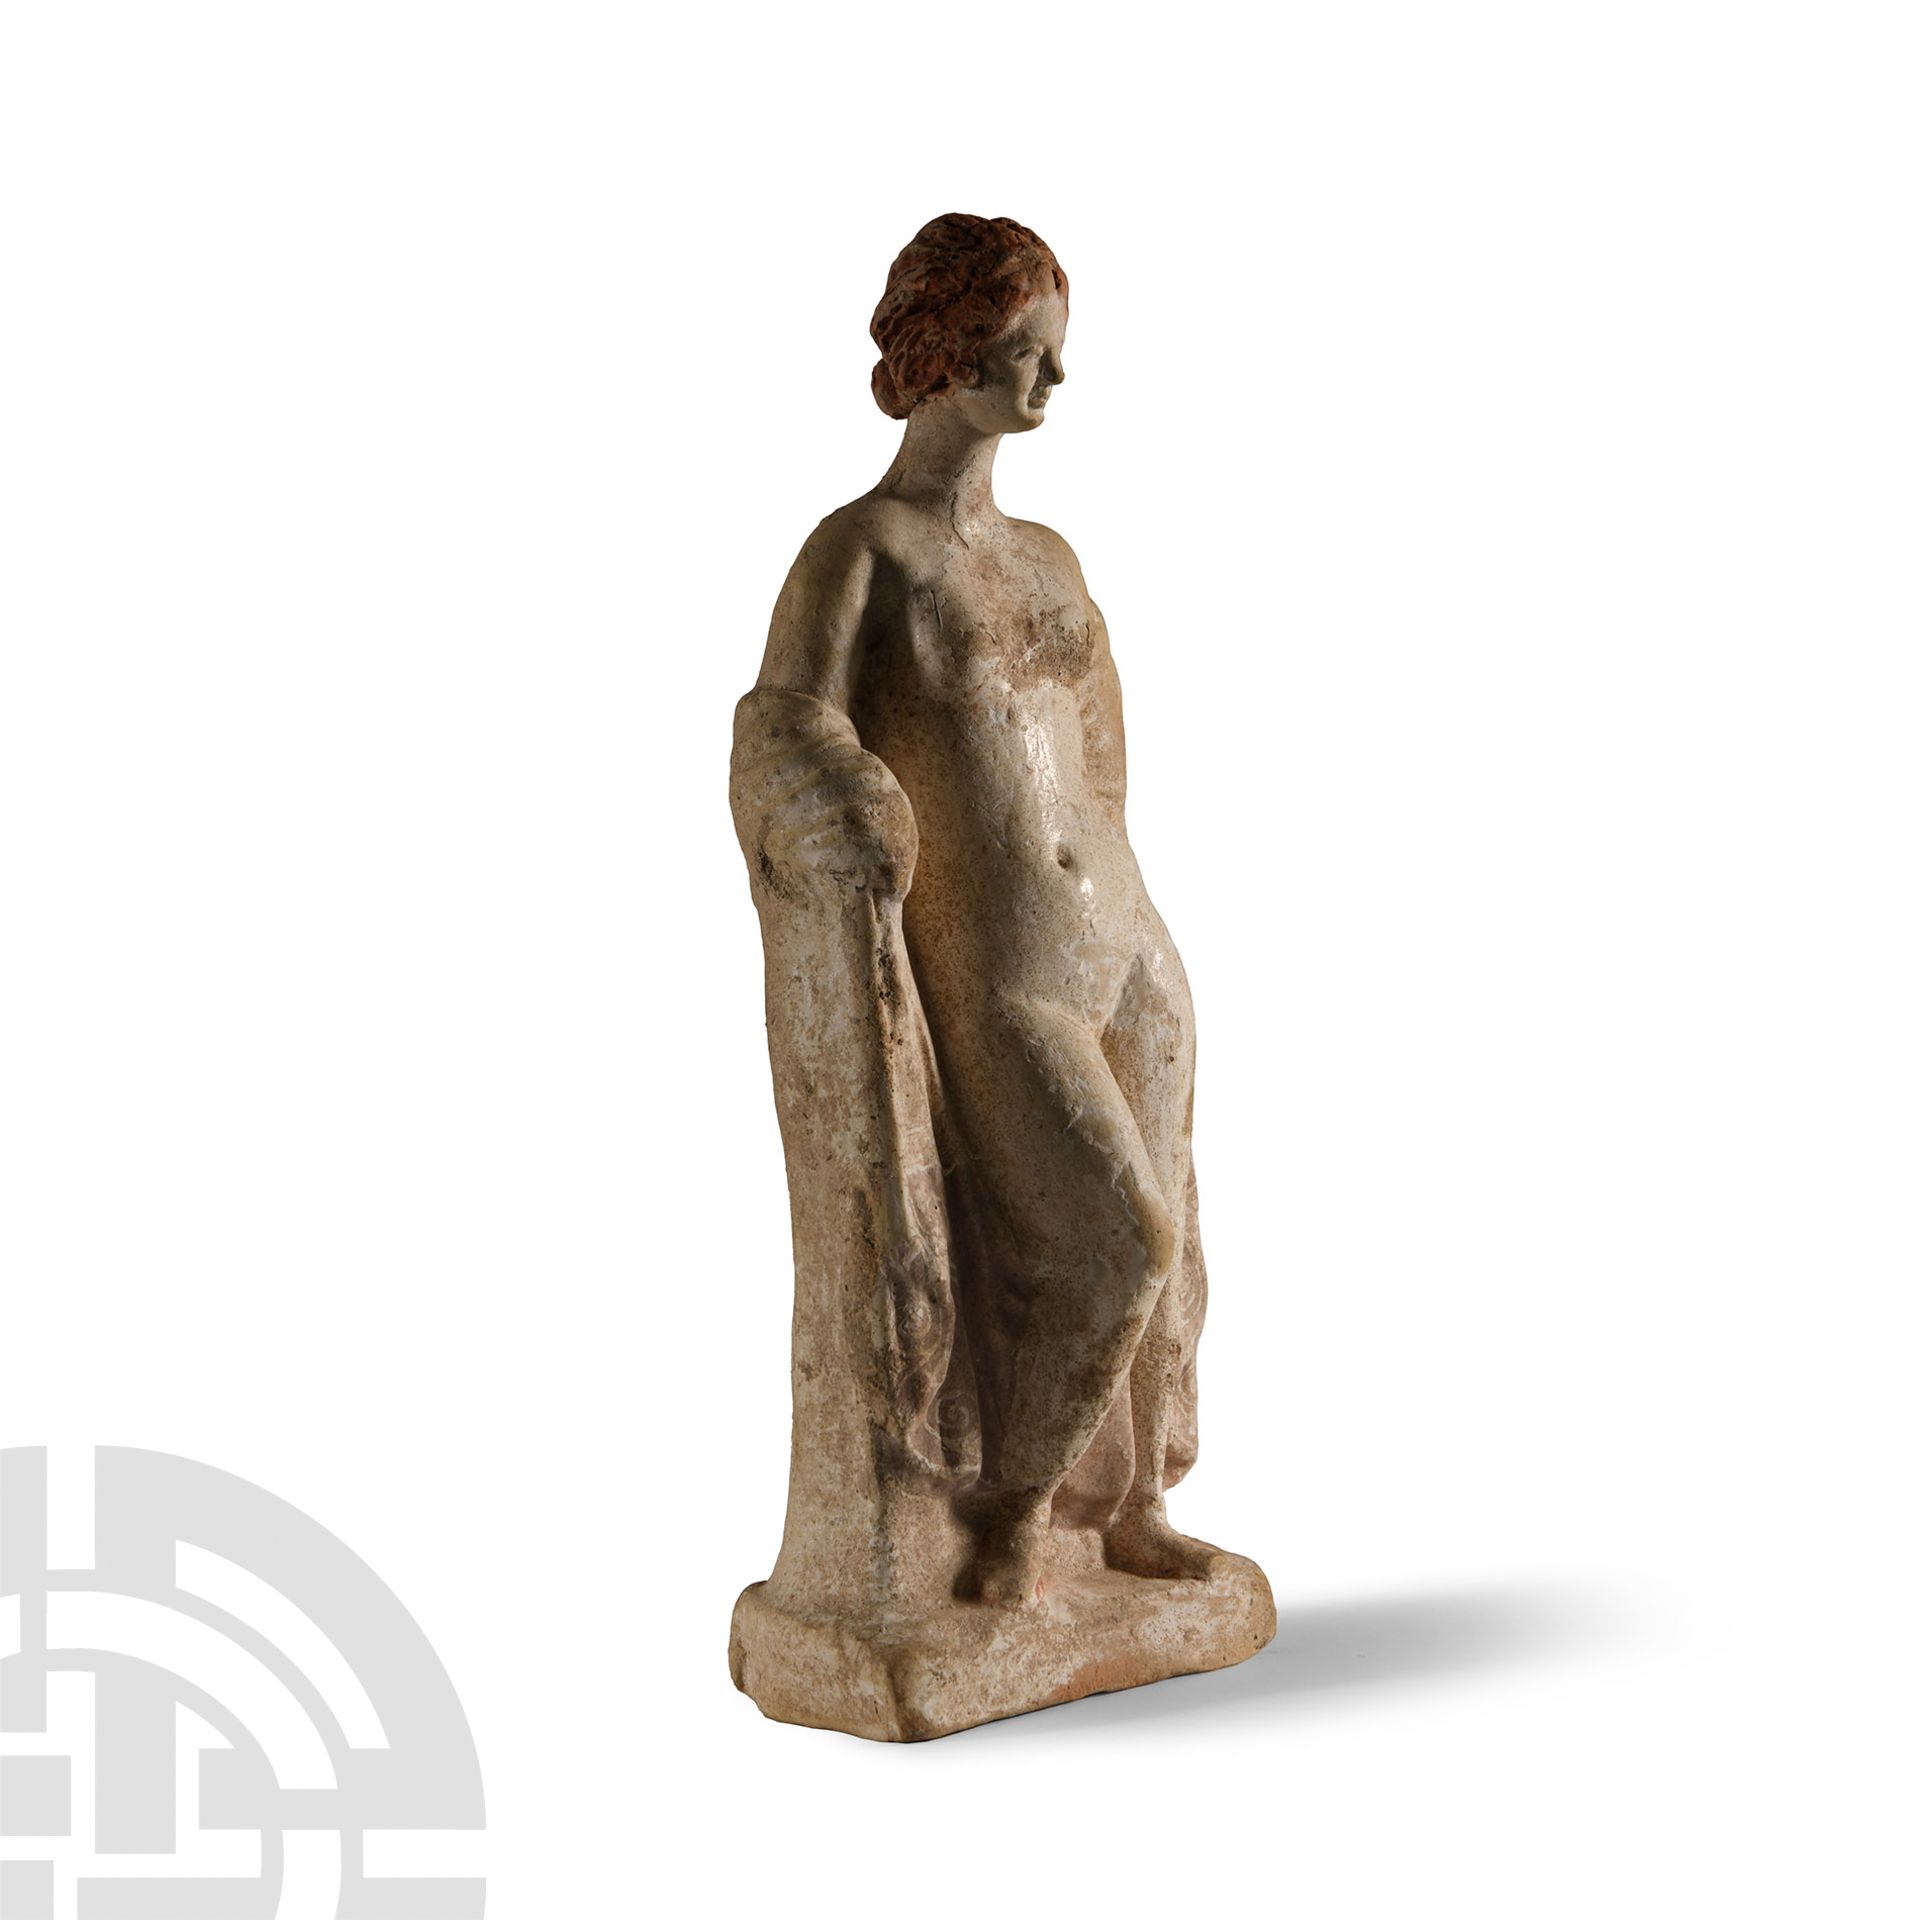 Hellenistic Painted Terracotta Figure of Aphrodite - Image 2 of 2